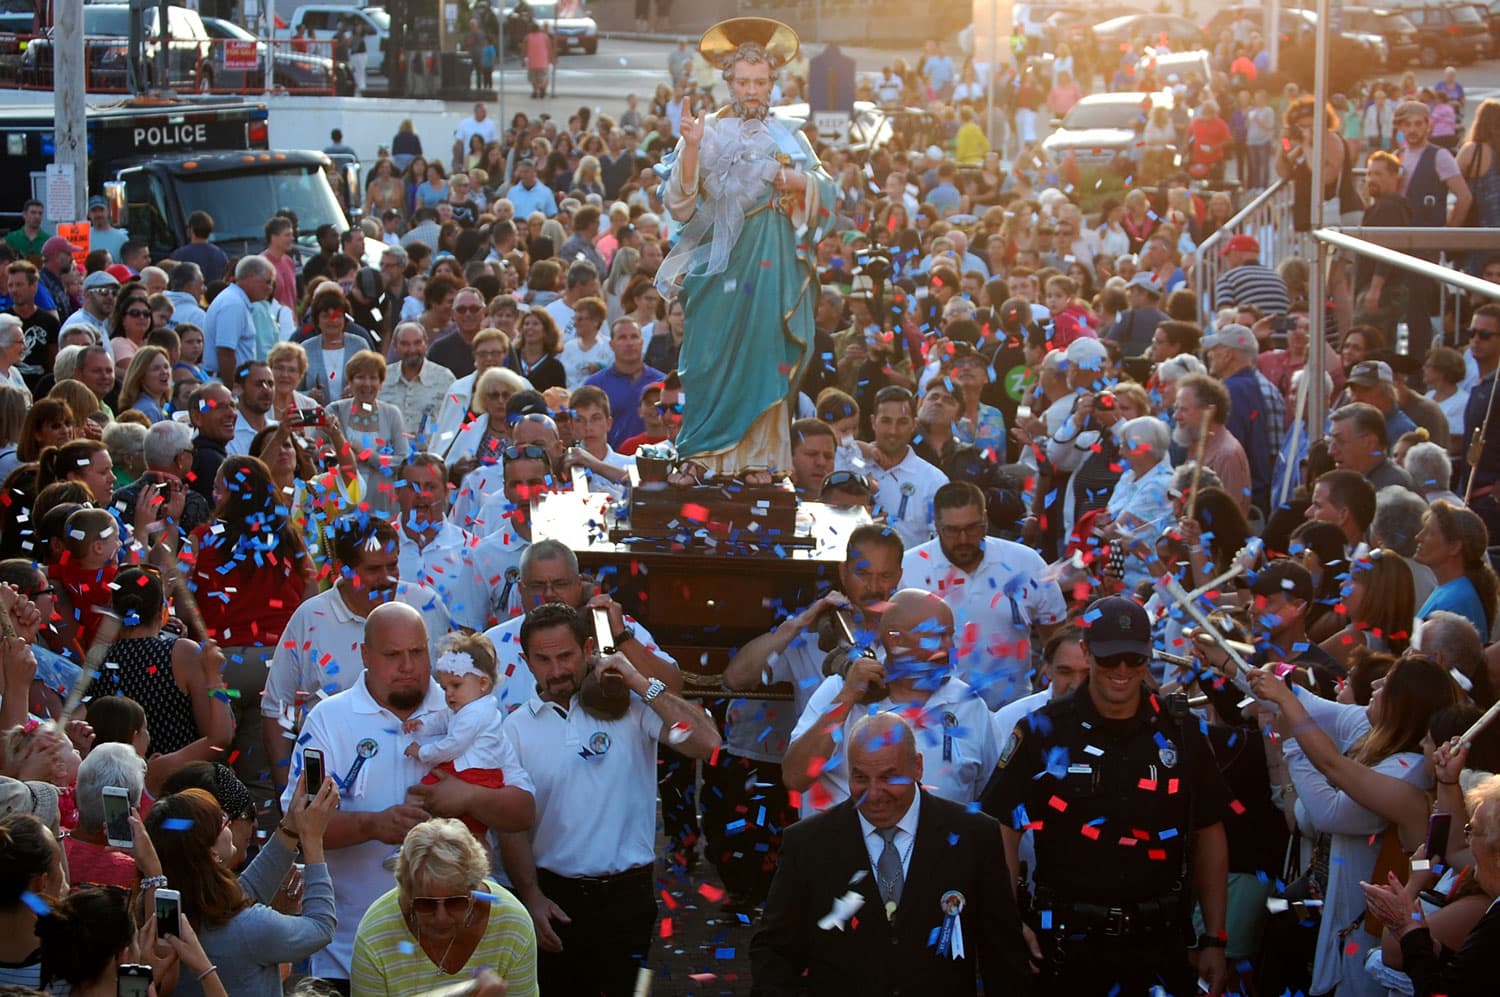 The statue of St. Peter is showered with confetti as it's carried into Gloucester's St. Peter's Square during the opening ceremonies of the St. Peter's Fiesta, June 24, 2016. (Greg Cook)